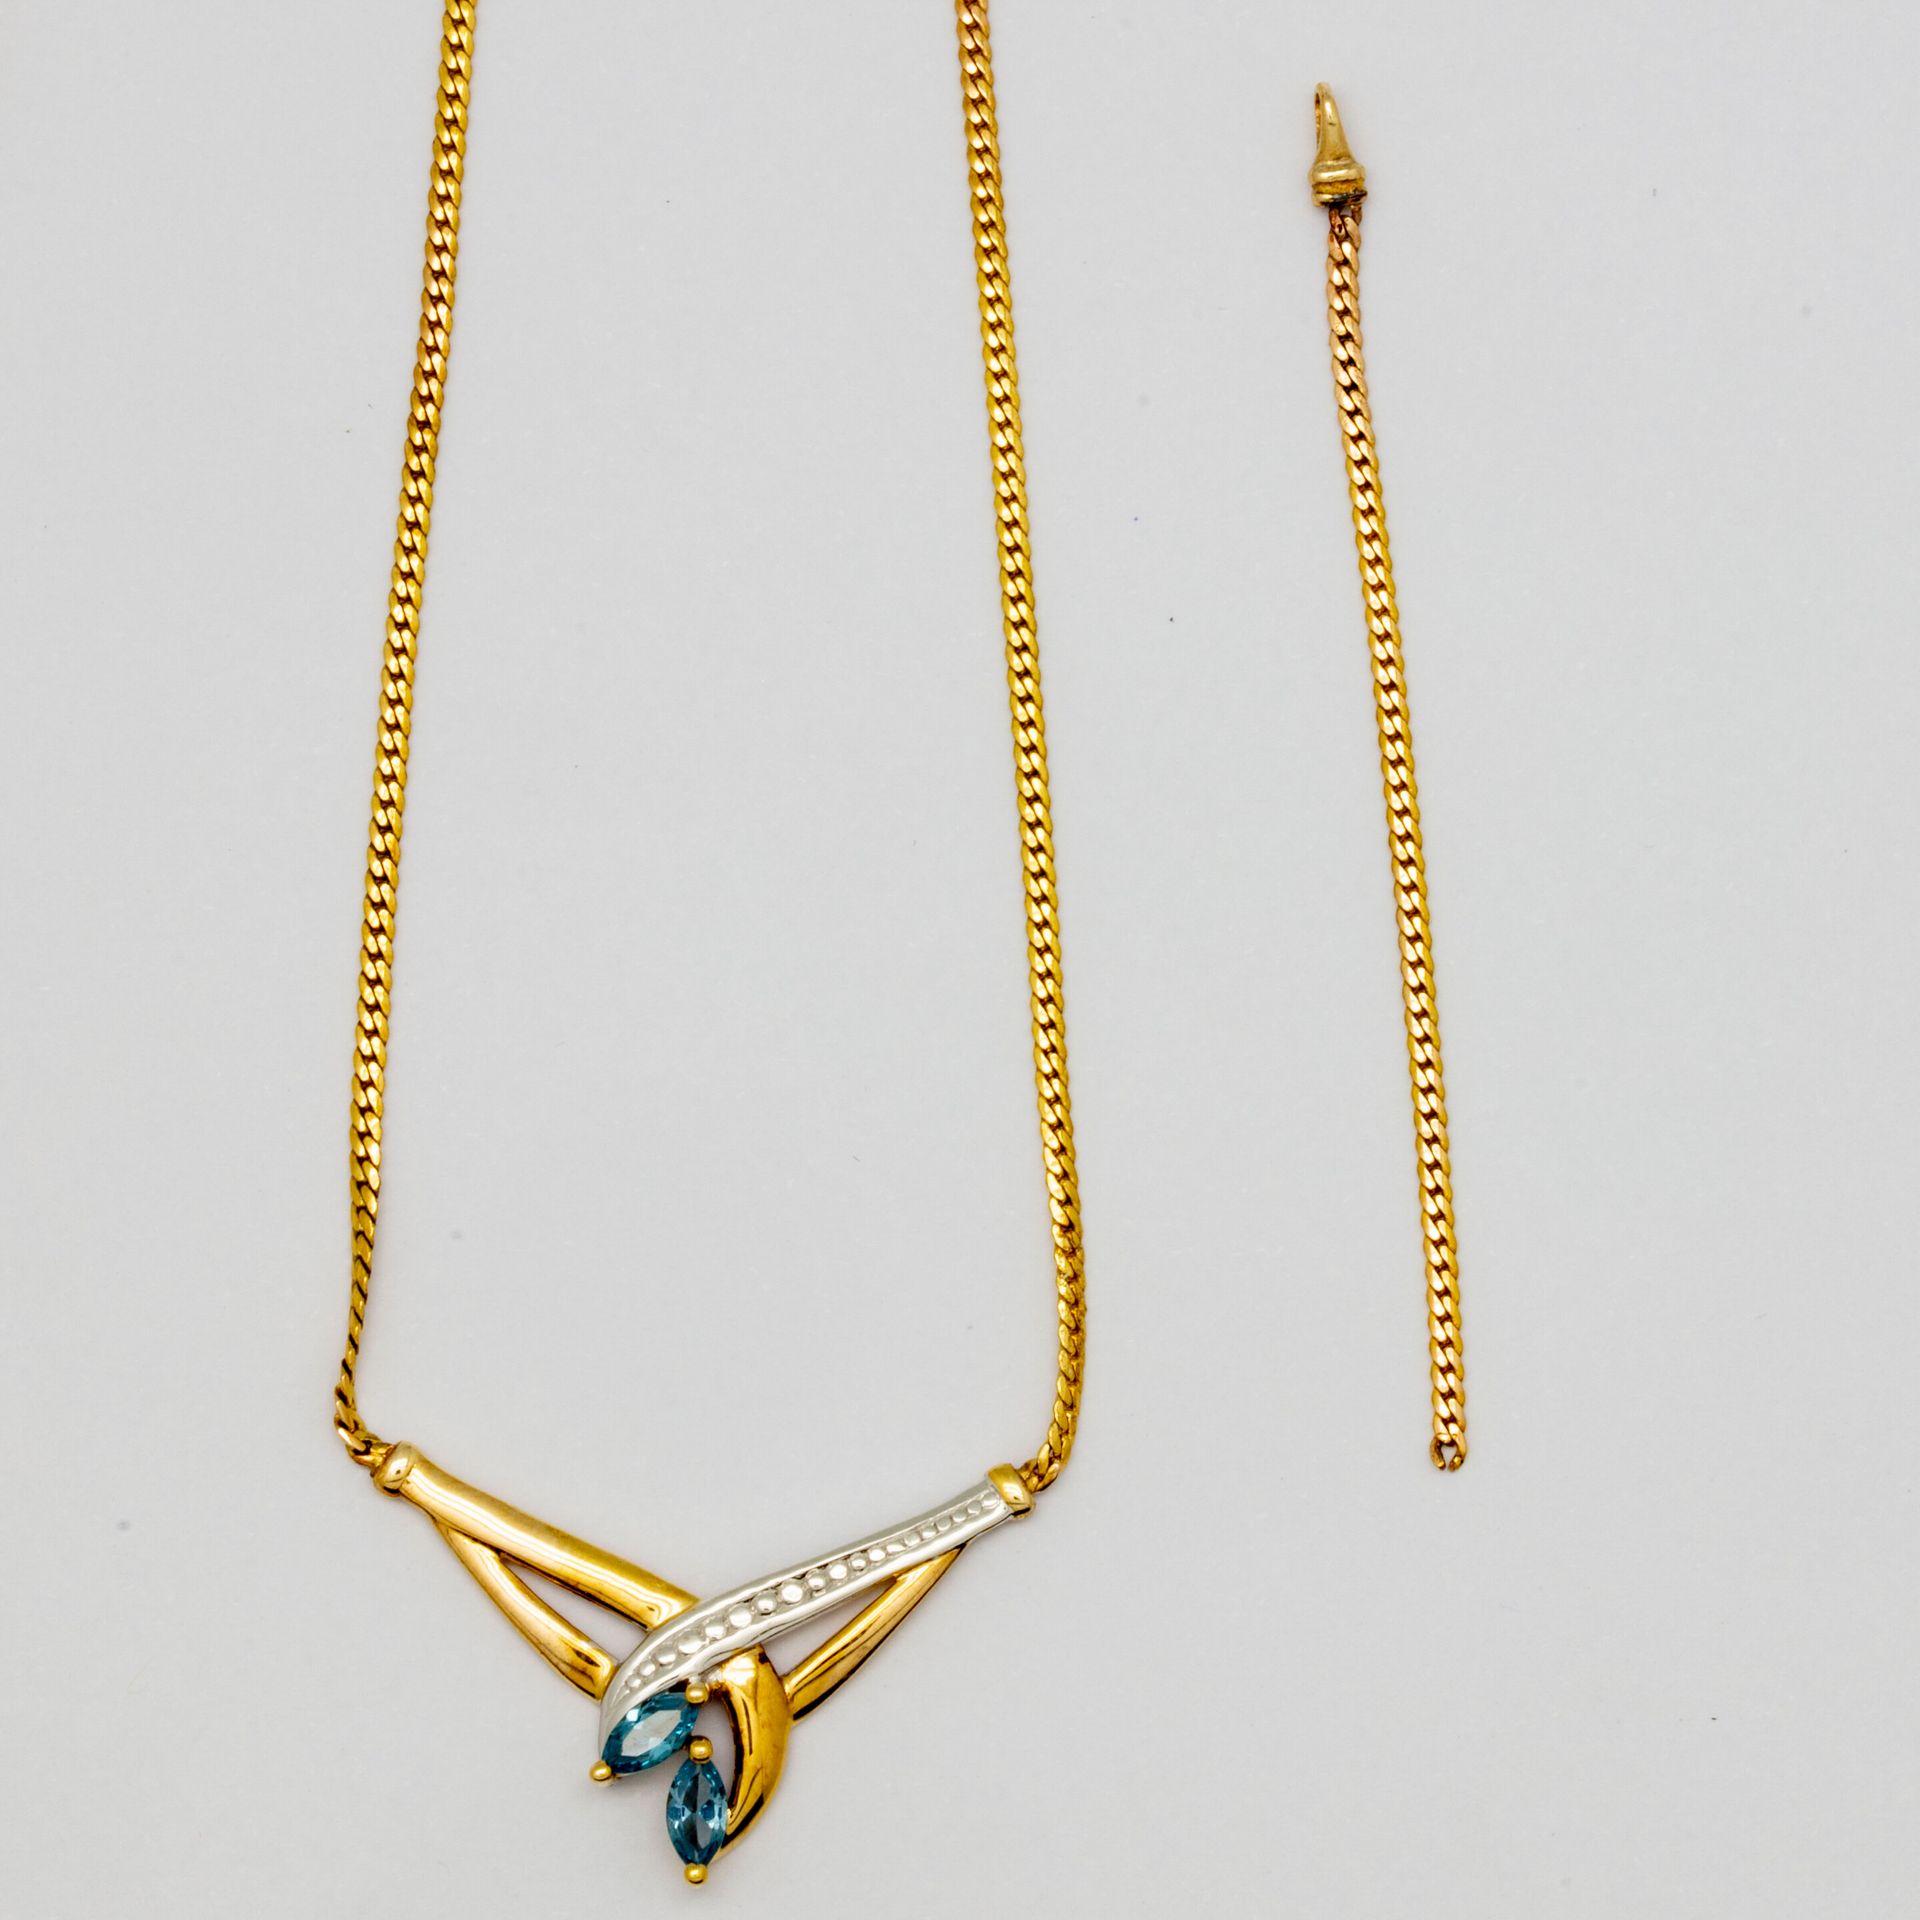 Null 9k yellow gold necklace with a blue topaz pendant

Gross weight: 3.9 g.

Ac&hellip;